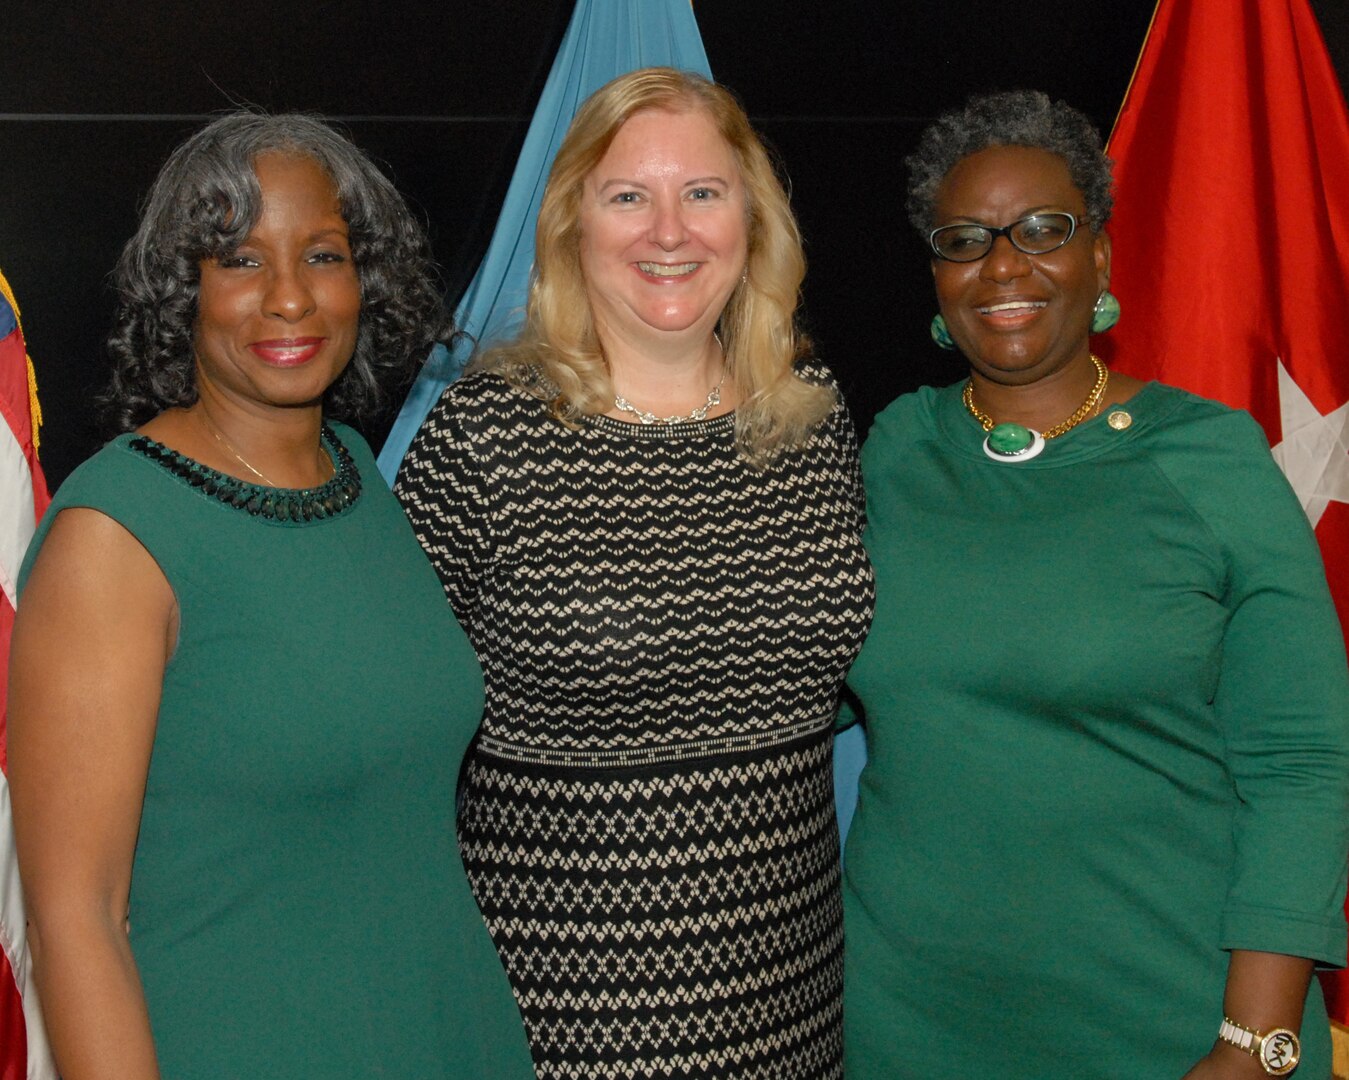 Defense Logistics Agency Troop Support employees Debra Tillman, Mary Newell and Bernice Eaddy-Brown (left to right) pose after an Oct. 25 retirement ceremony in Philadelphia honoring their 110 years of cumulative service to the agency.